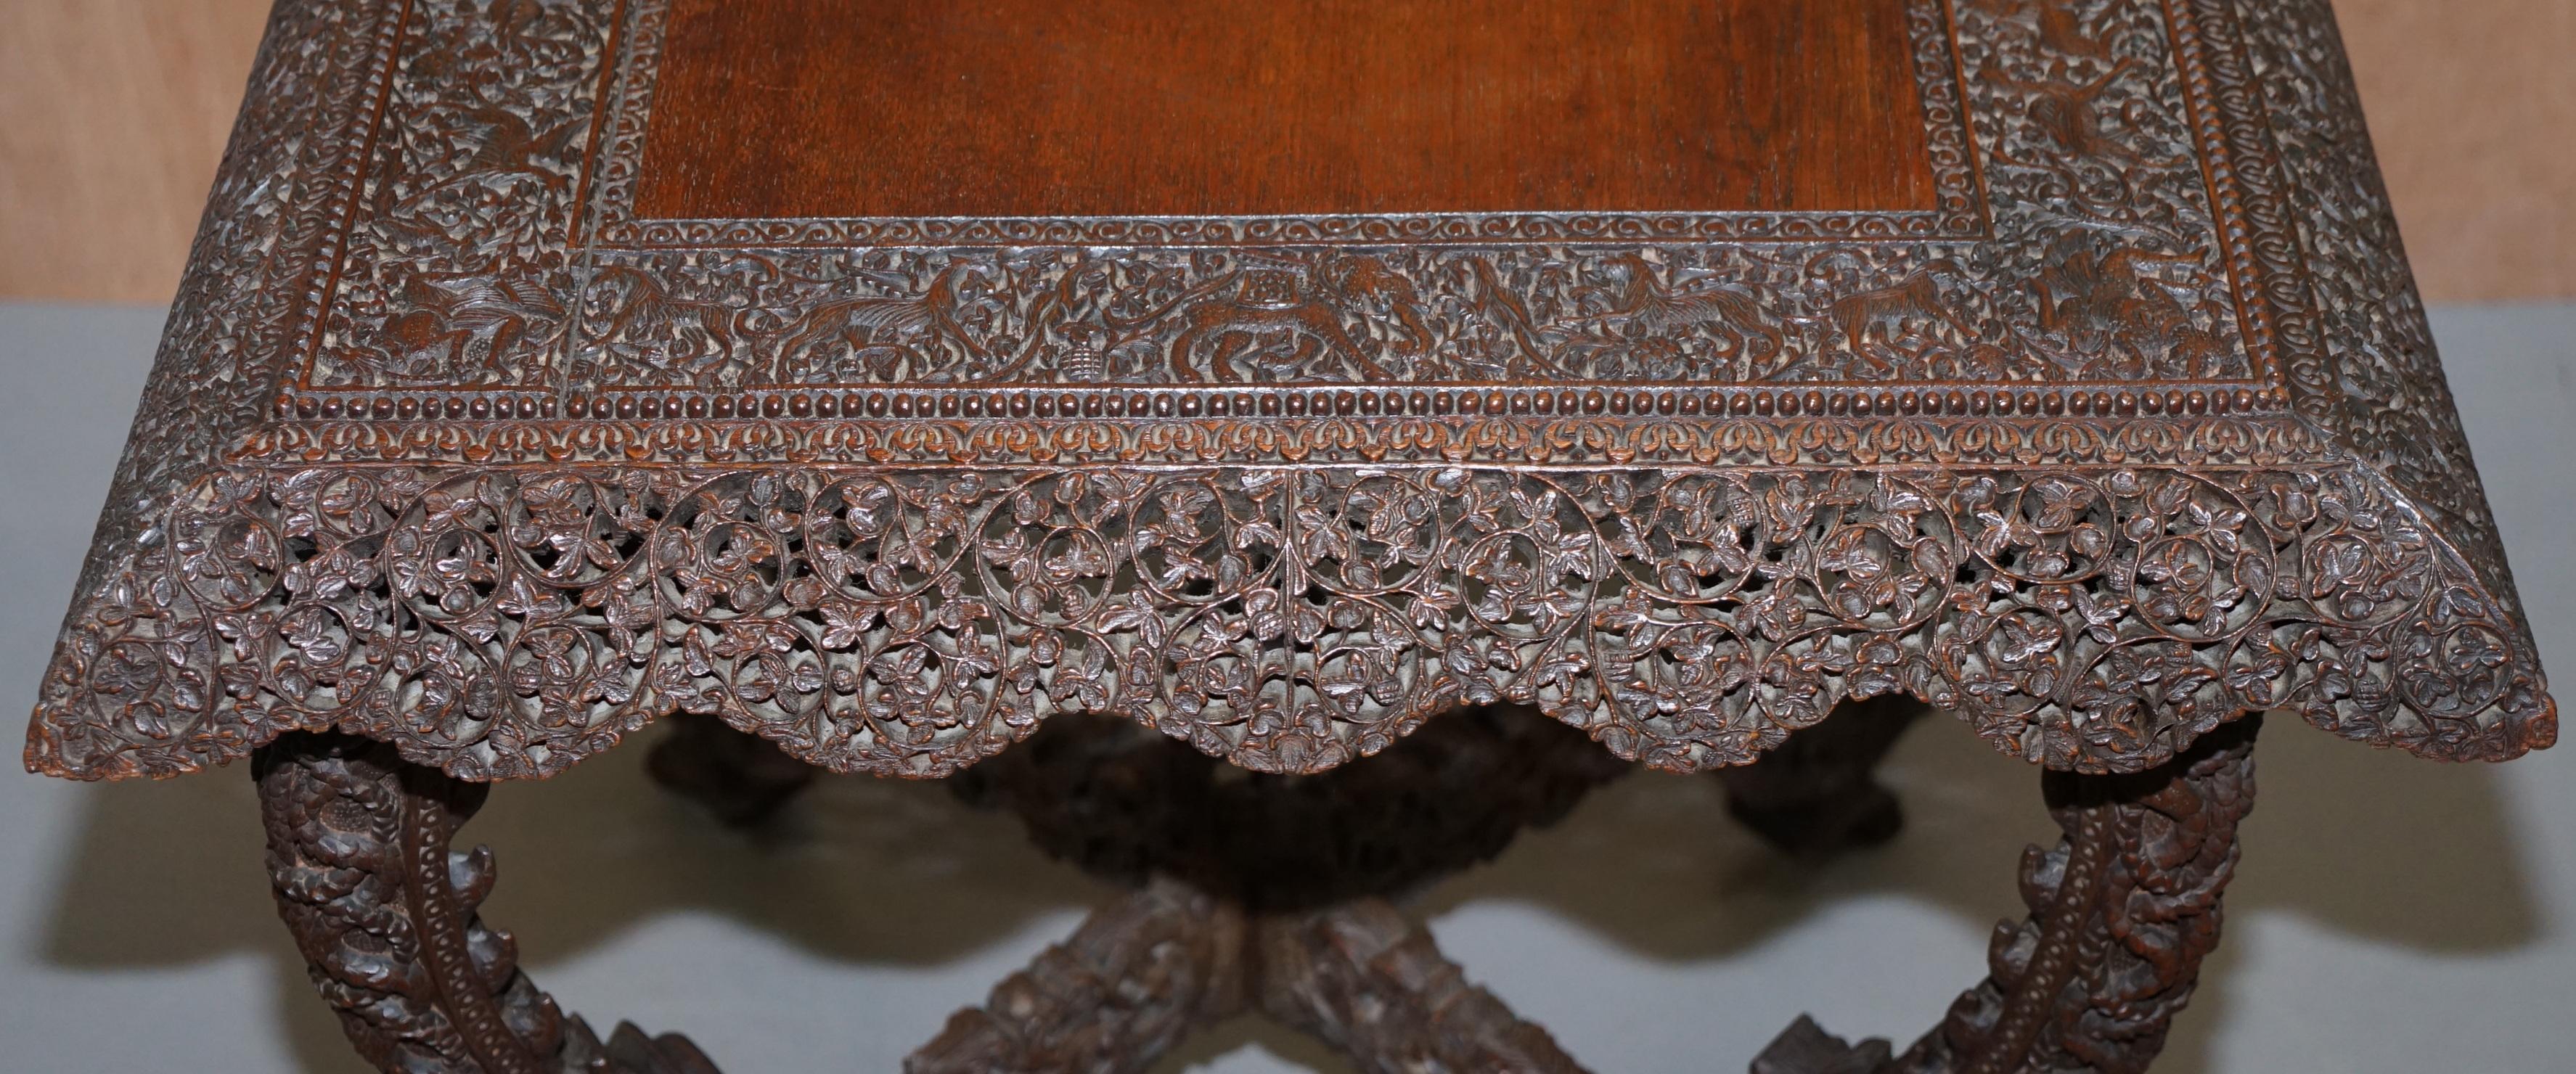 Hand-Crafted Rare Burmese circa 1880 Anglo Indian Hardwood Square Centre Occasional Table